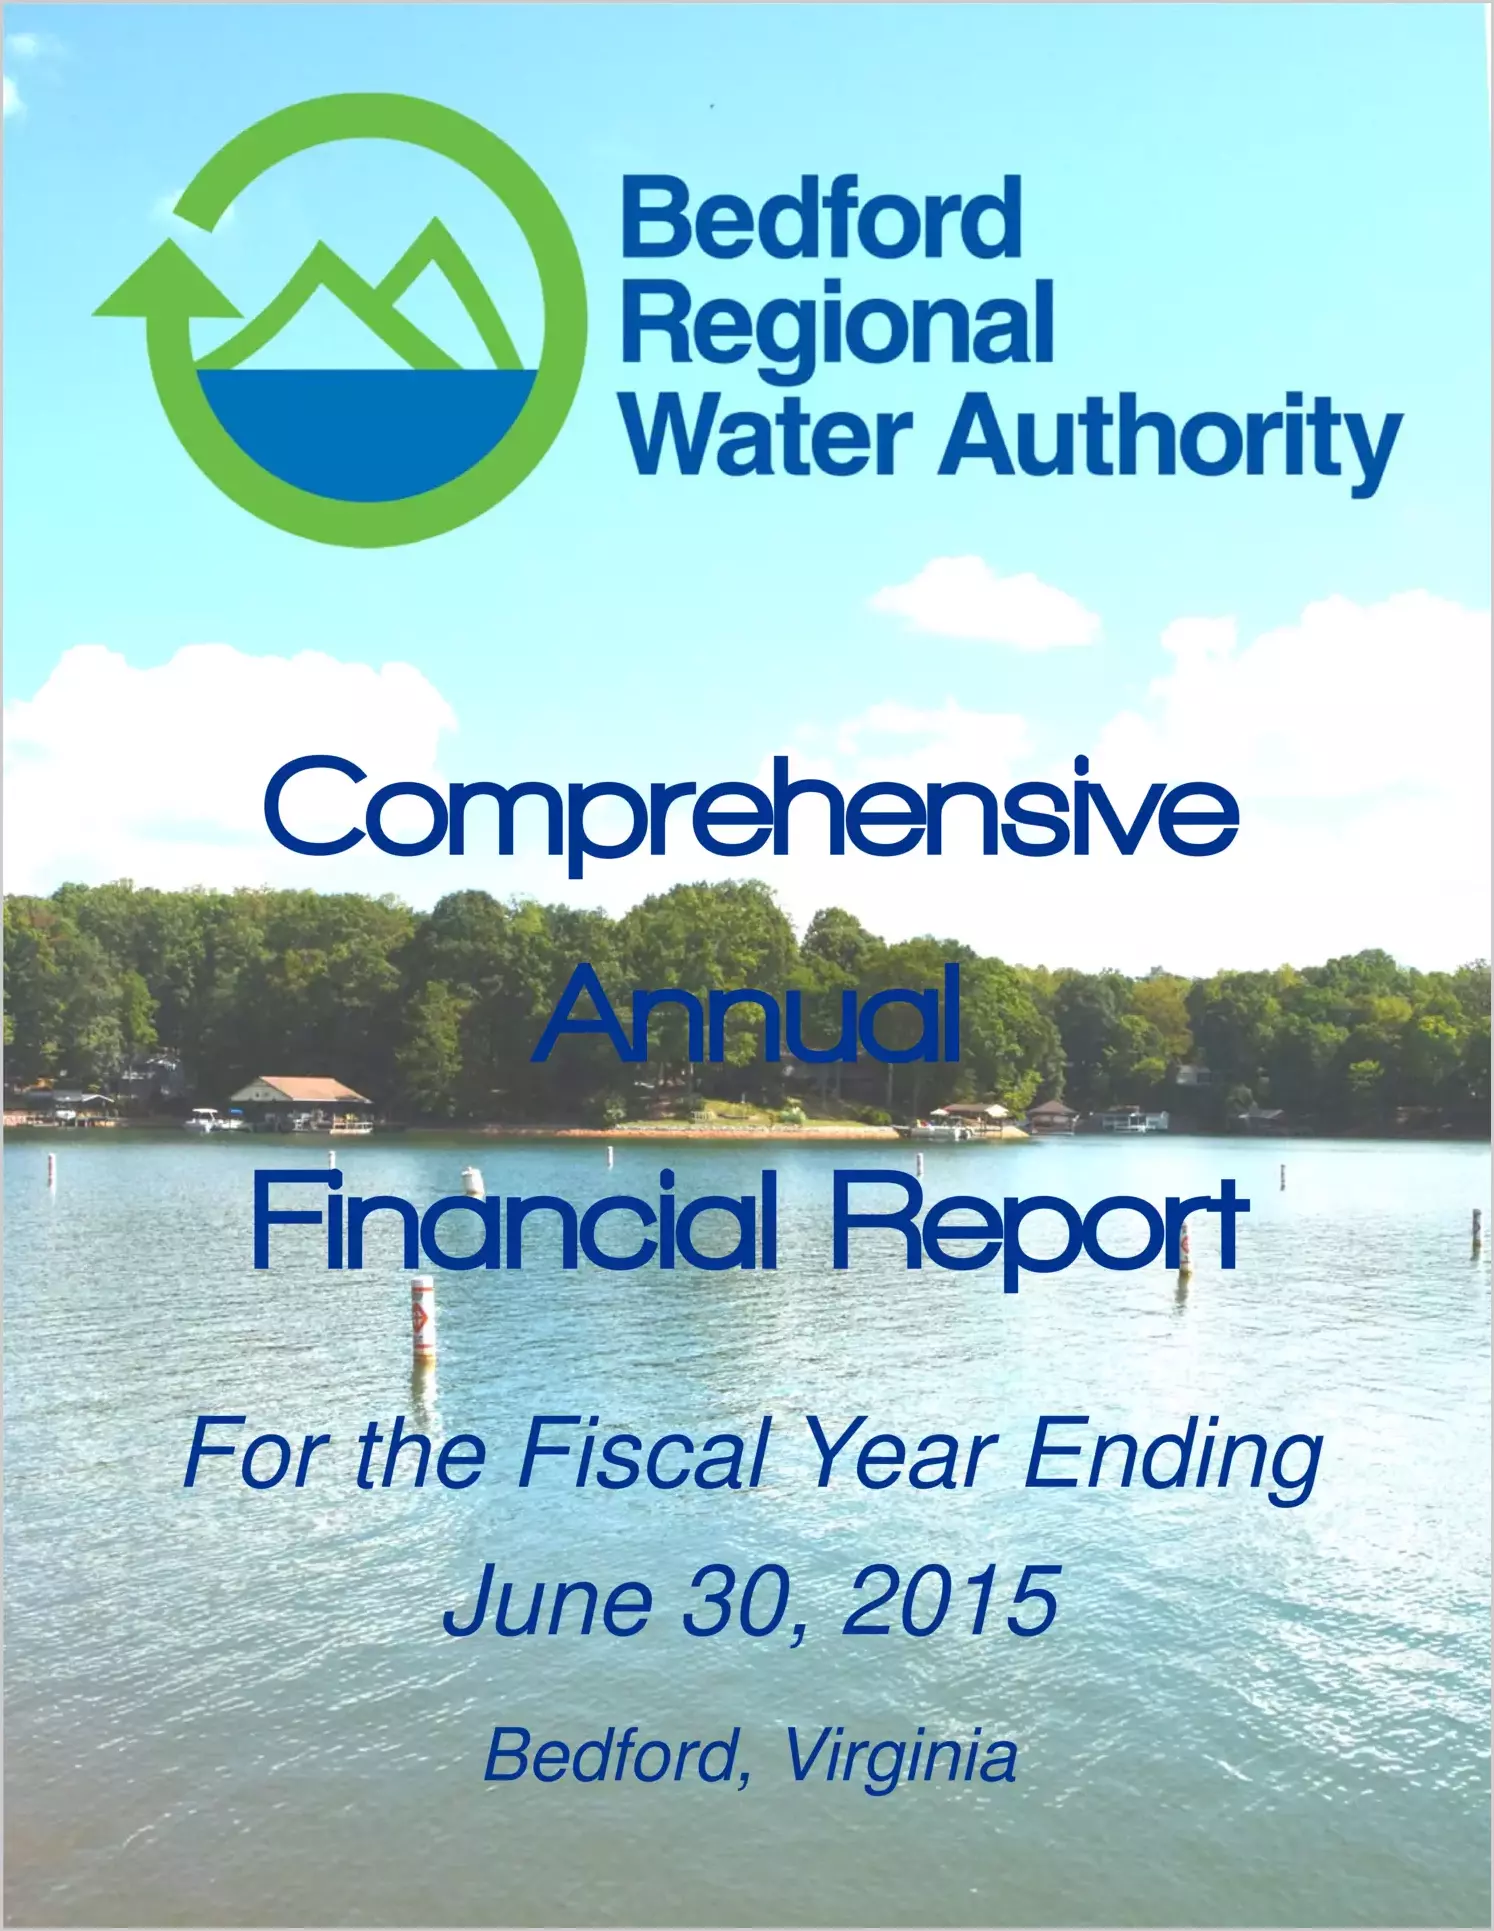 2015 ABC/Other Annual Financial Report  for Bedford Regional Water Authority